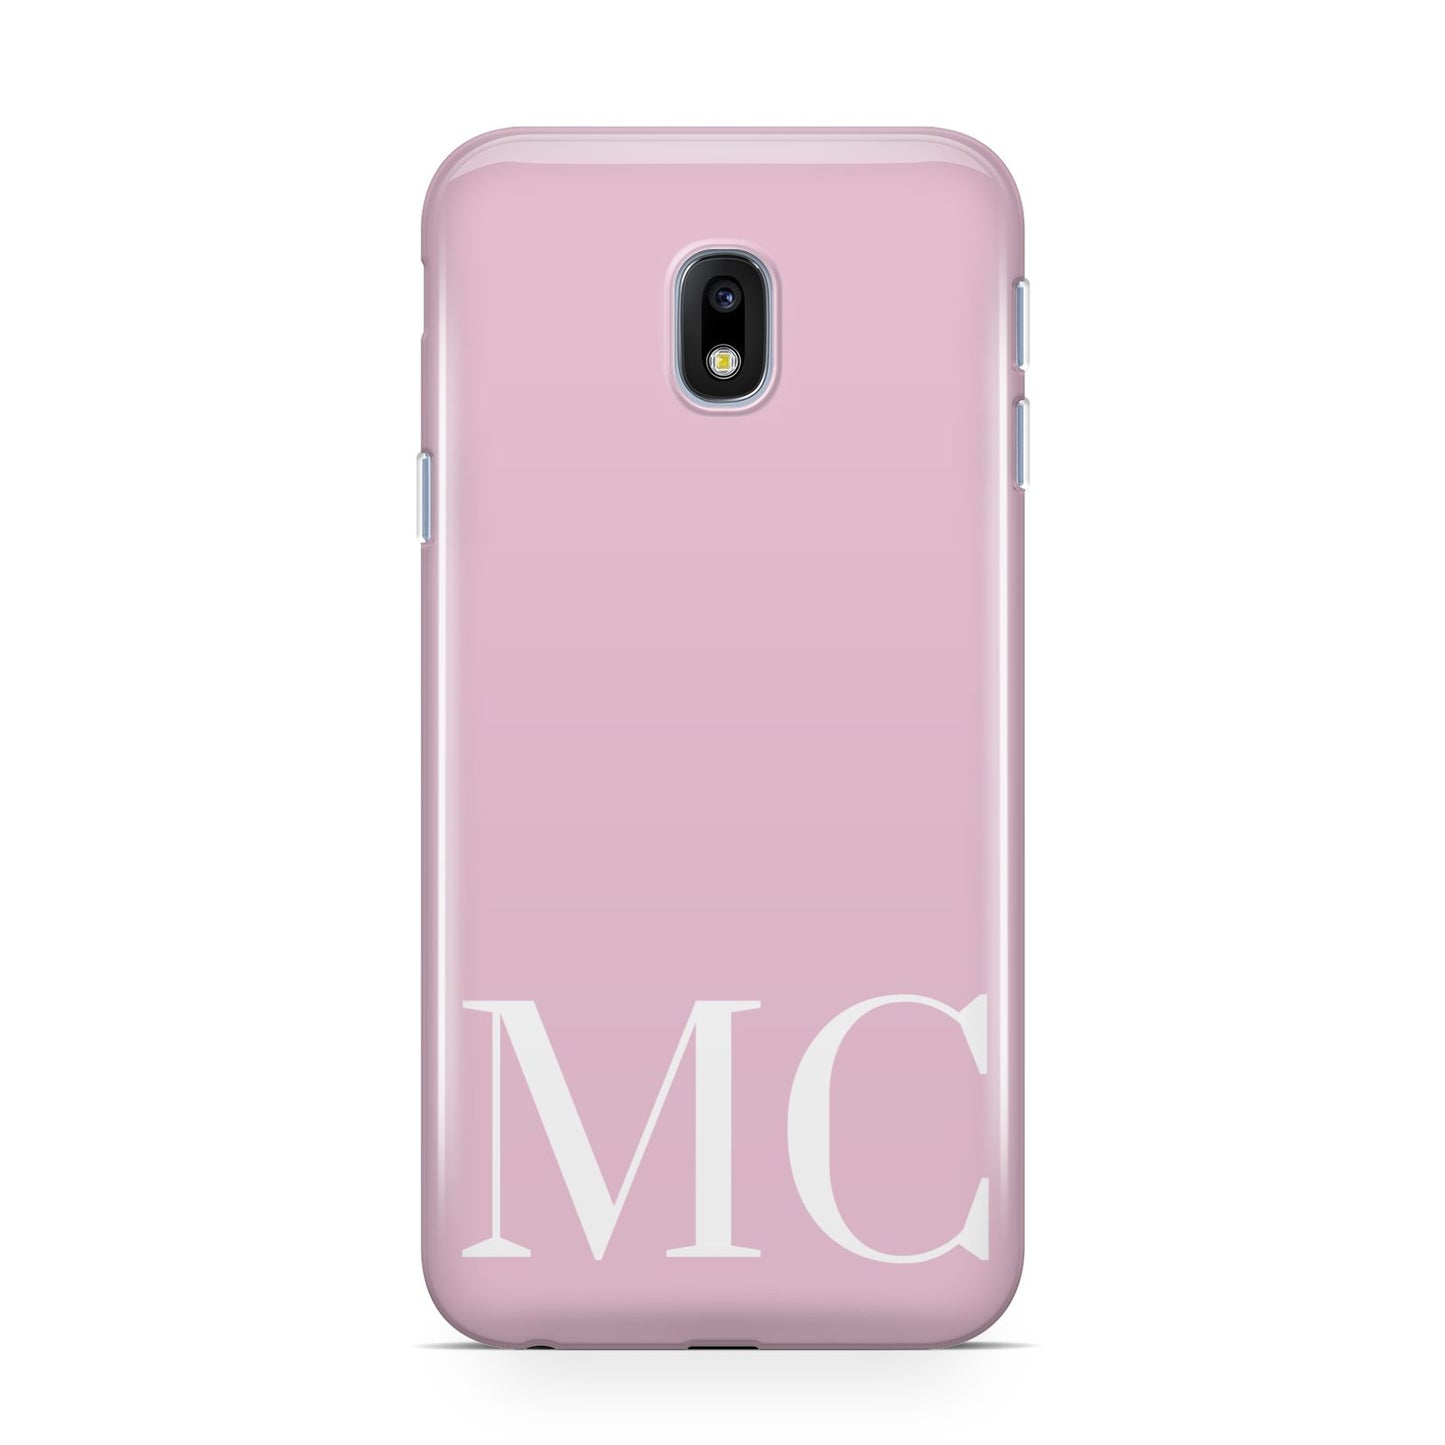 Initials Personalised 2 Samsung Galaxy J3 2017 Case